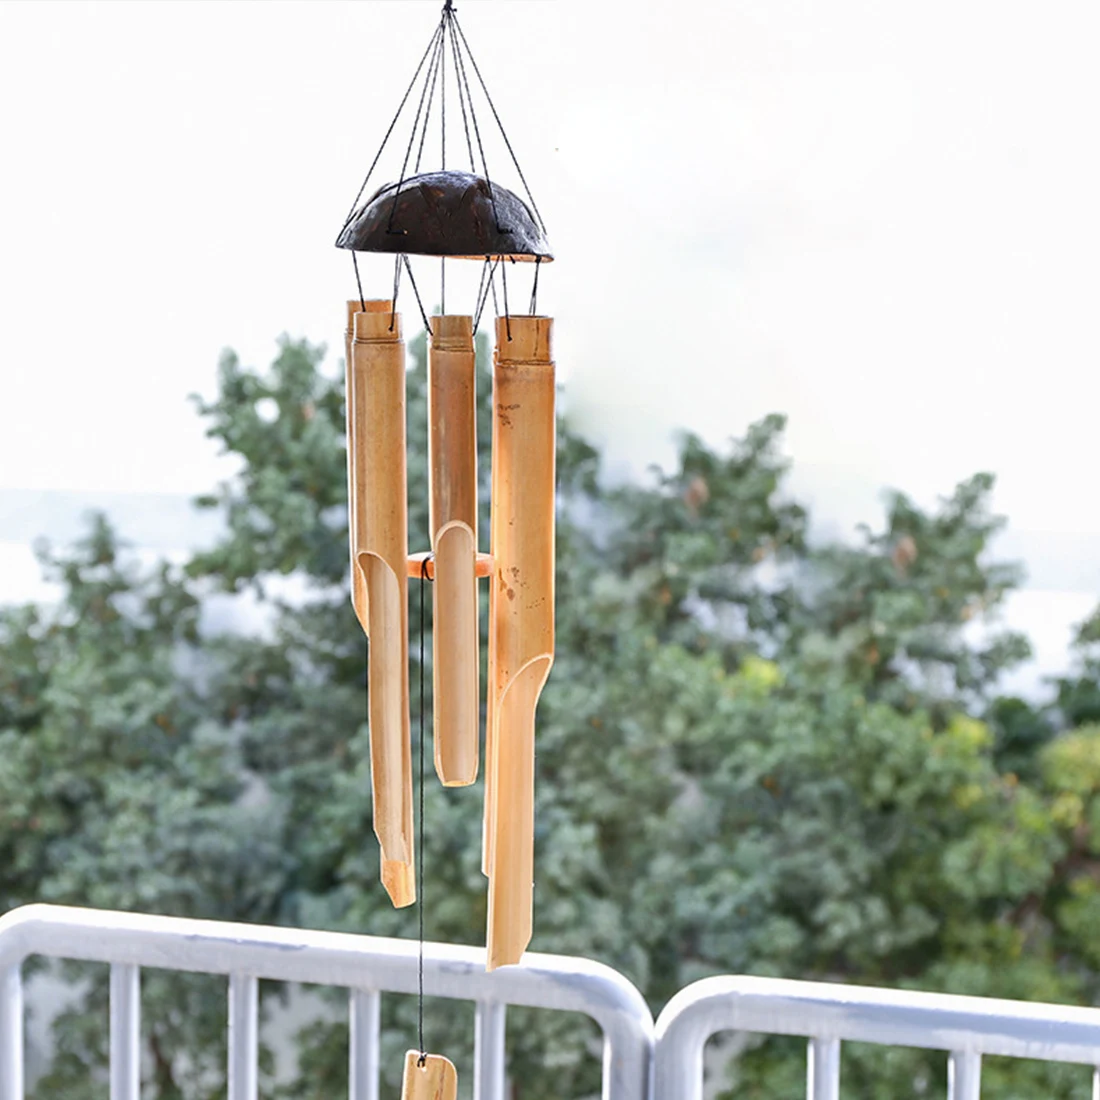 

Outdoor Bamboo Wind Chimes Yard Garden Bell Tubes Coconut Wood Wind Chime Wall Hanging Home Decor Wooden Windchimes Gifts